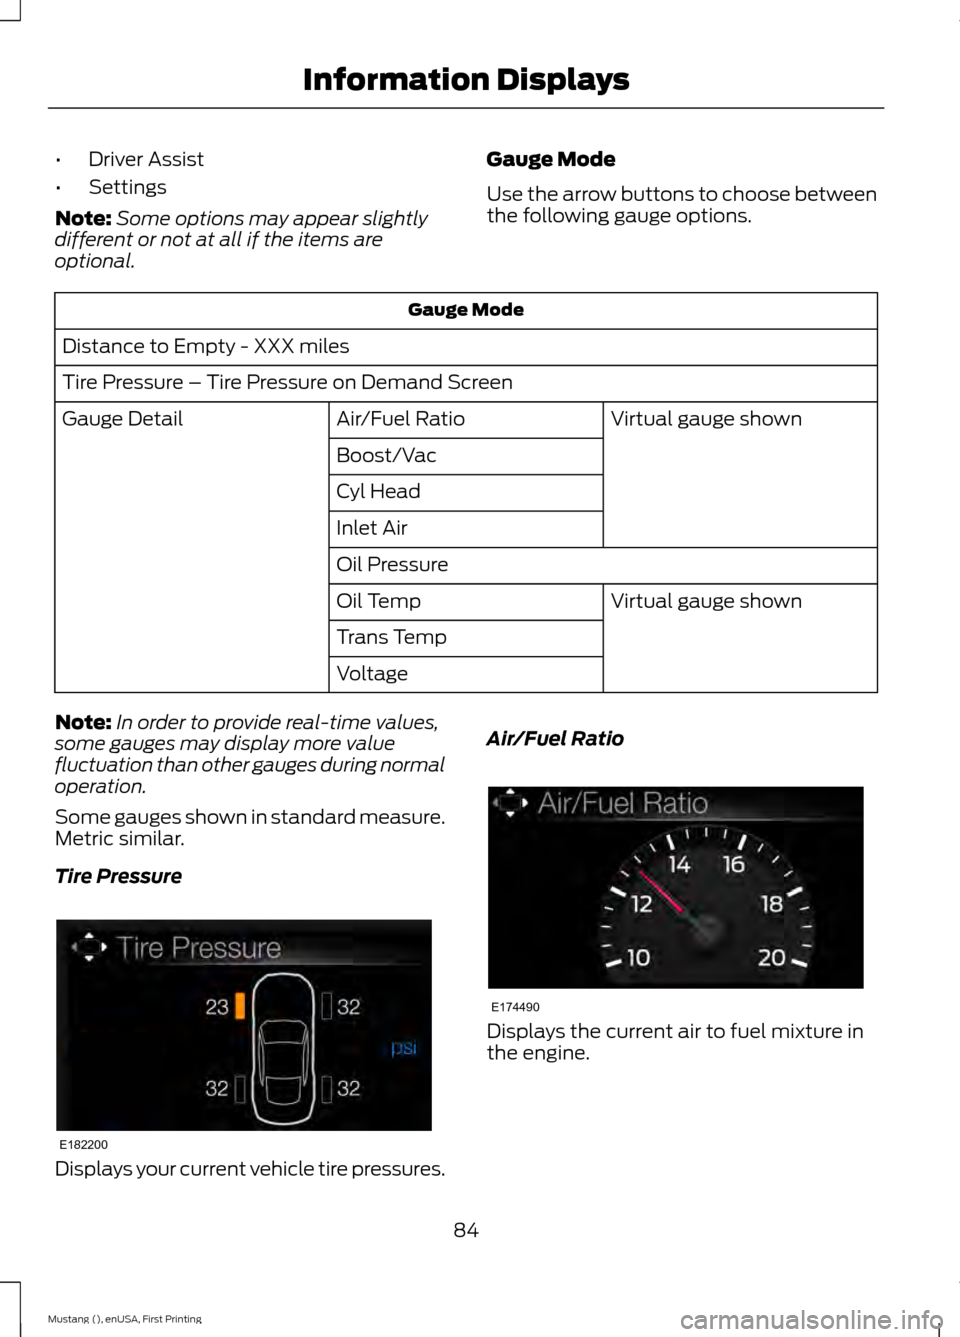 FORD MUSTANG 2015 6.G Owners Manual •
Driver Assist
• Settings
Note: Some options may appear slightly
different or not at all if the items are
optional. Gauge Mode
Use the arrow buttons to choose between
the following gauge options.